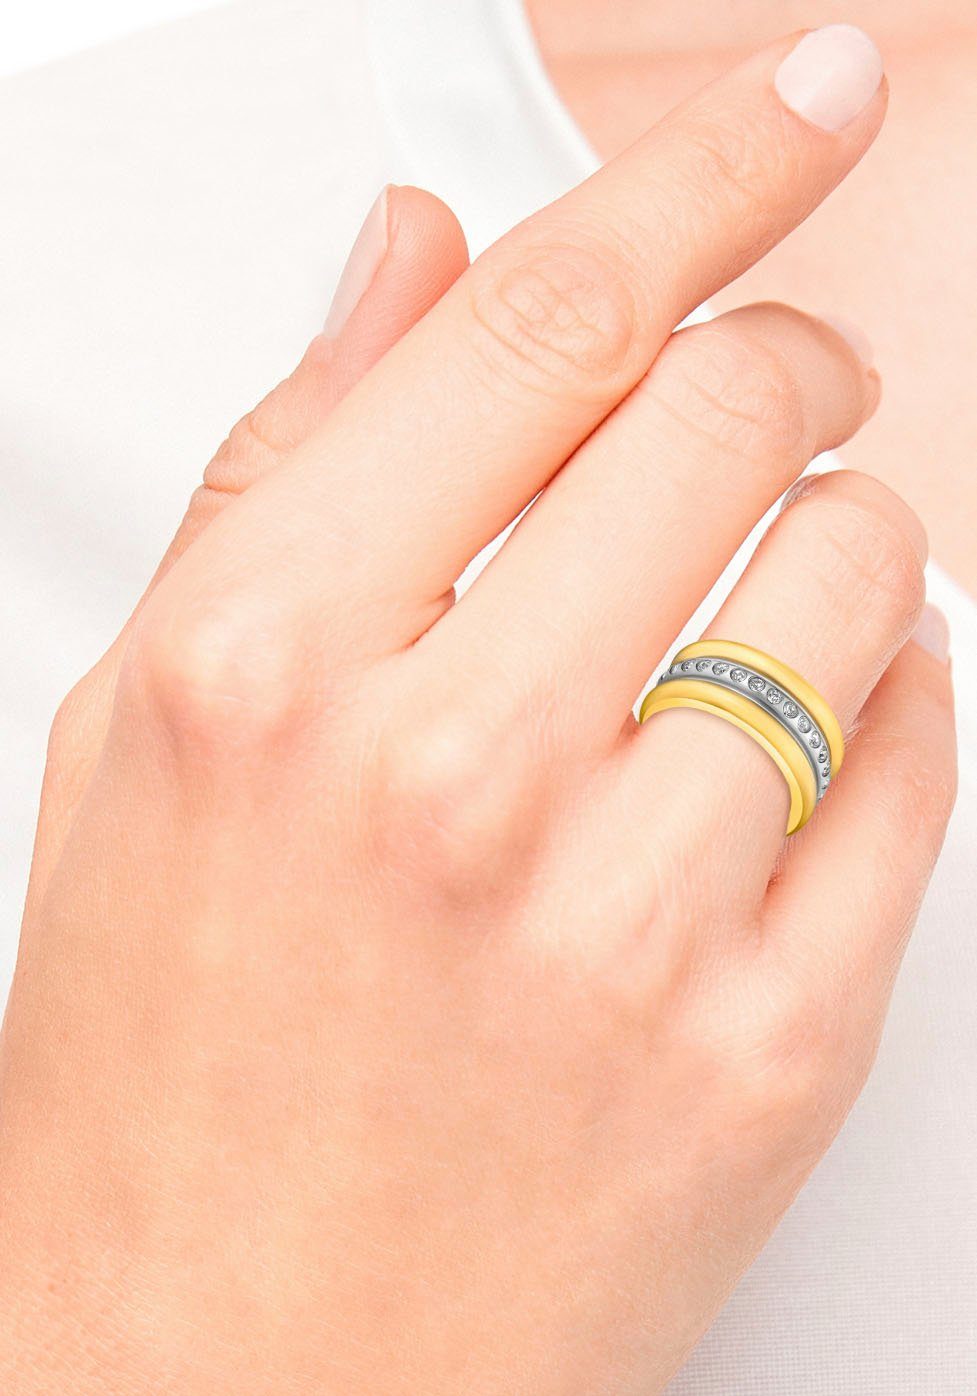 Fingerring Zirkonia mit 2036837/-38/-39/-40, (synth) s.Oliver